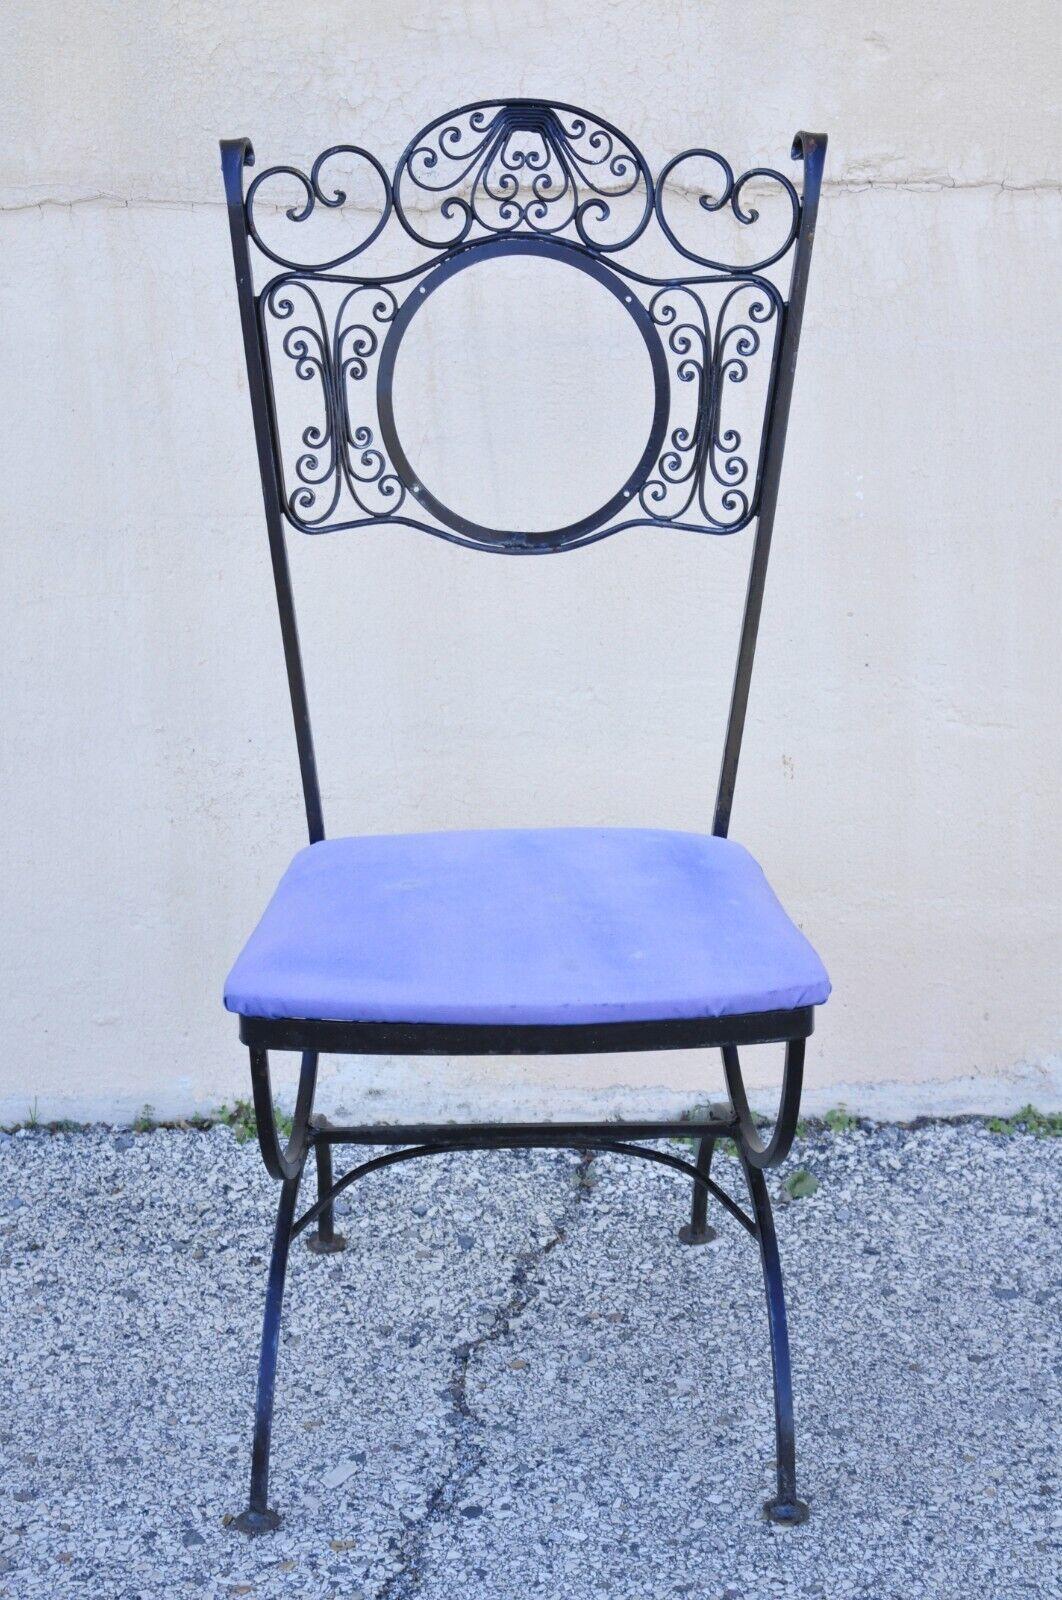 Contempo Vintage Woodard Andalusion style wrought iron dining chairs - set of 4. Item features (4) chairs, wrought iron scrolling frames, curule form bases, round back rest (missing upholstered panel), very nice vintage set, great style and form.